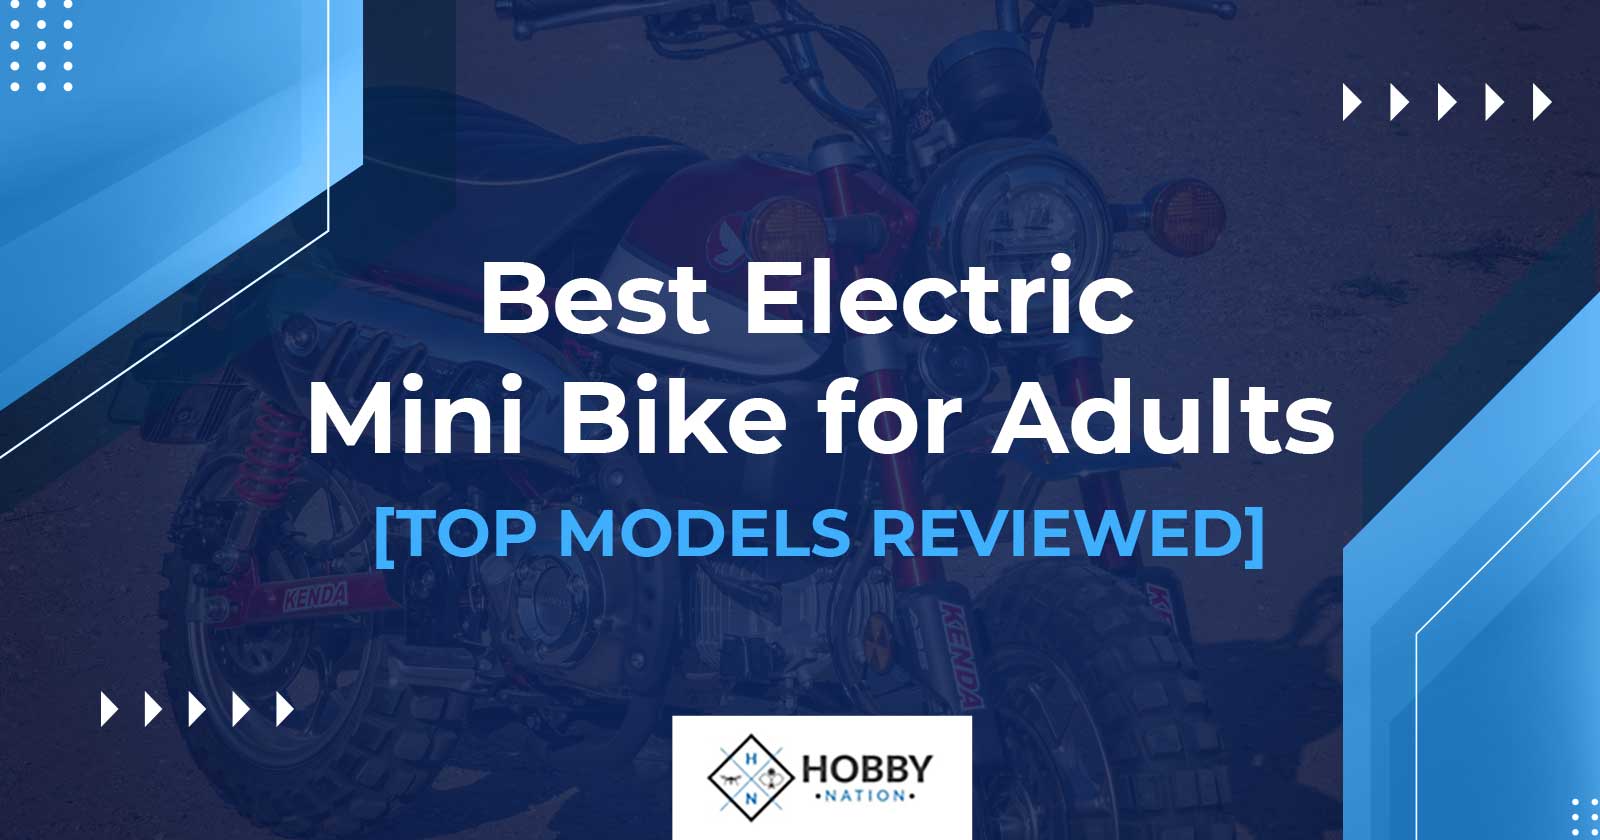 Best Electric Mini Bike for Adults [TOP MODELS REVIEWED]